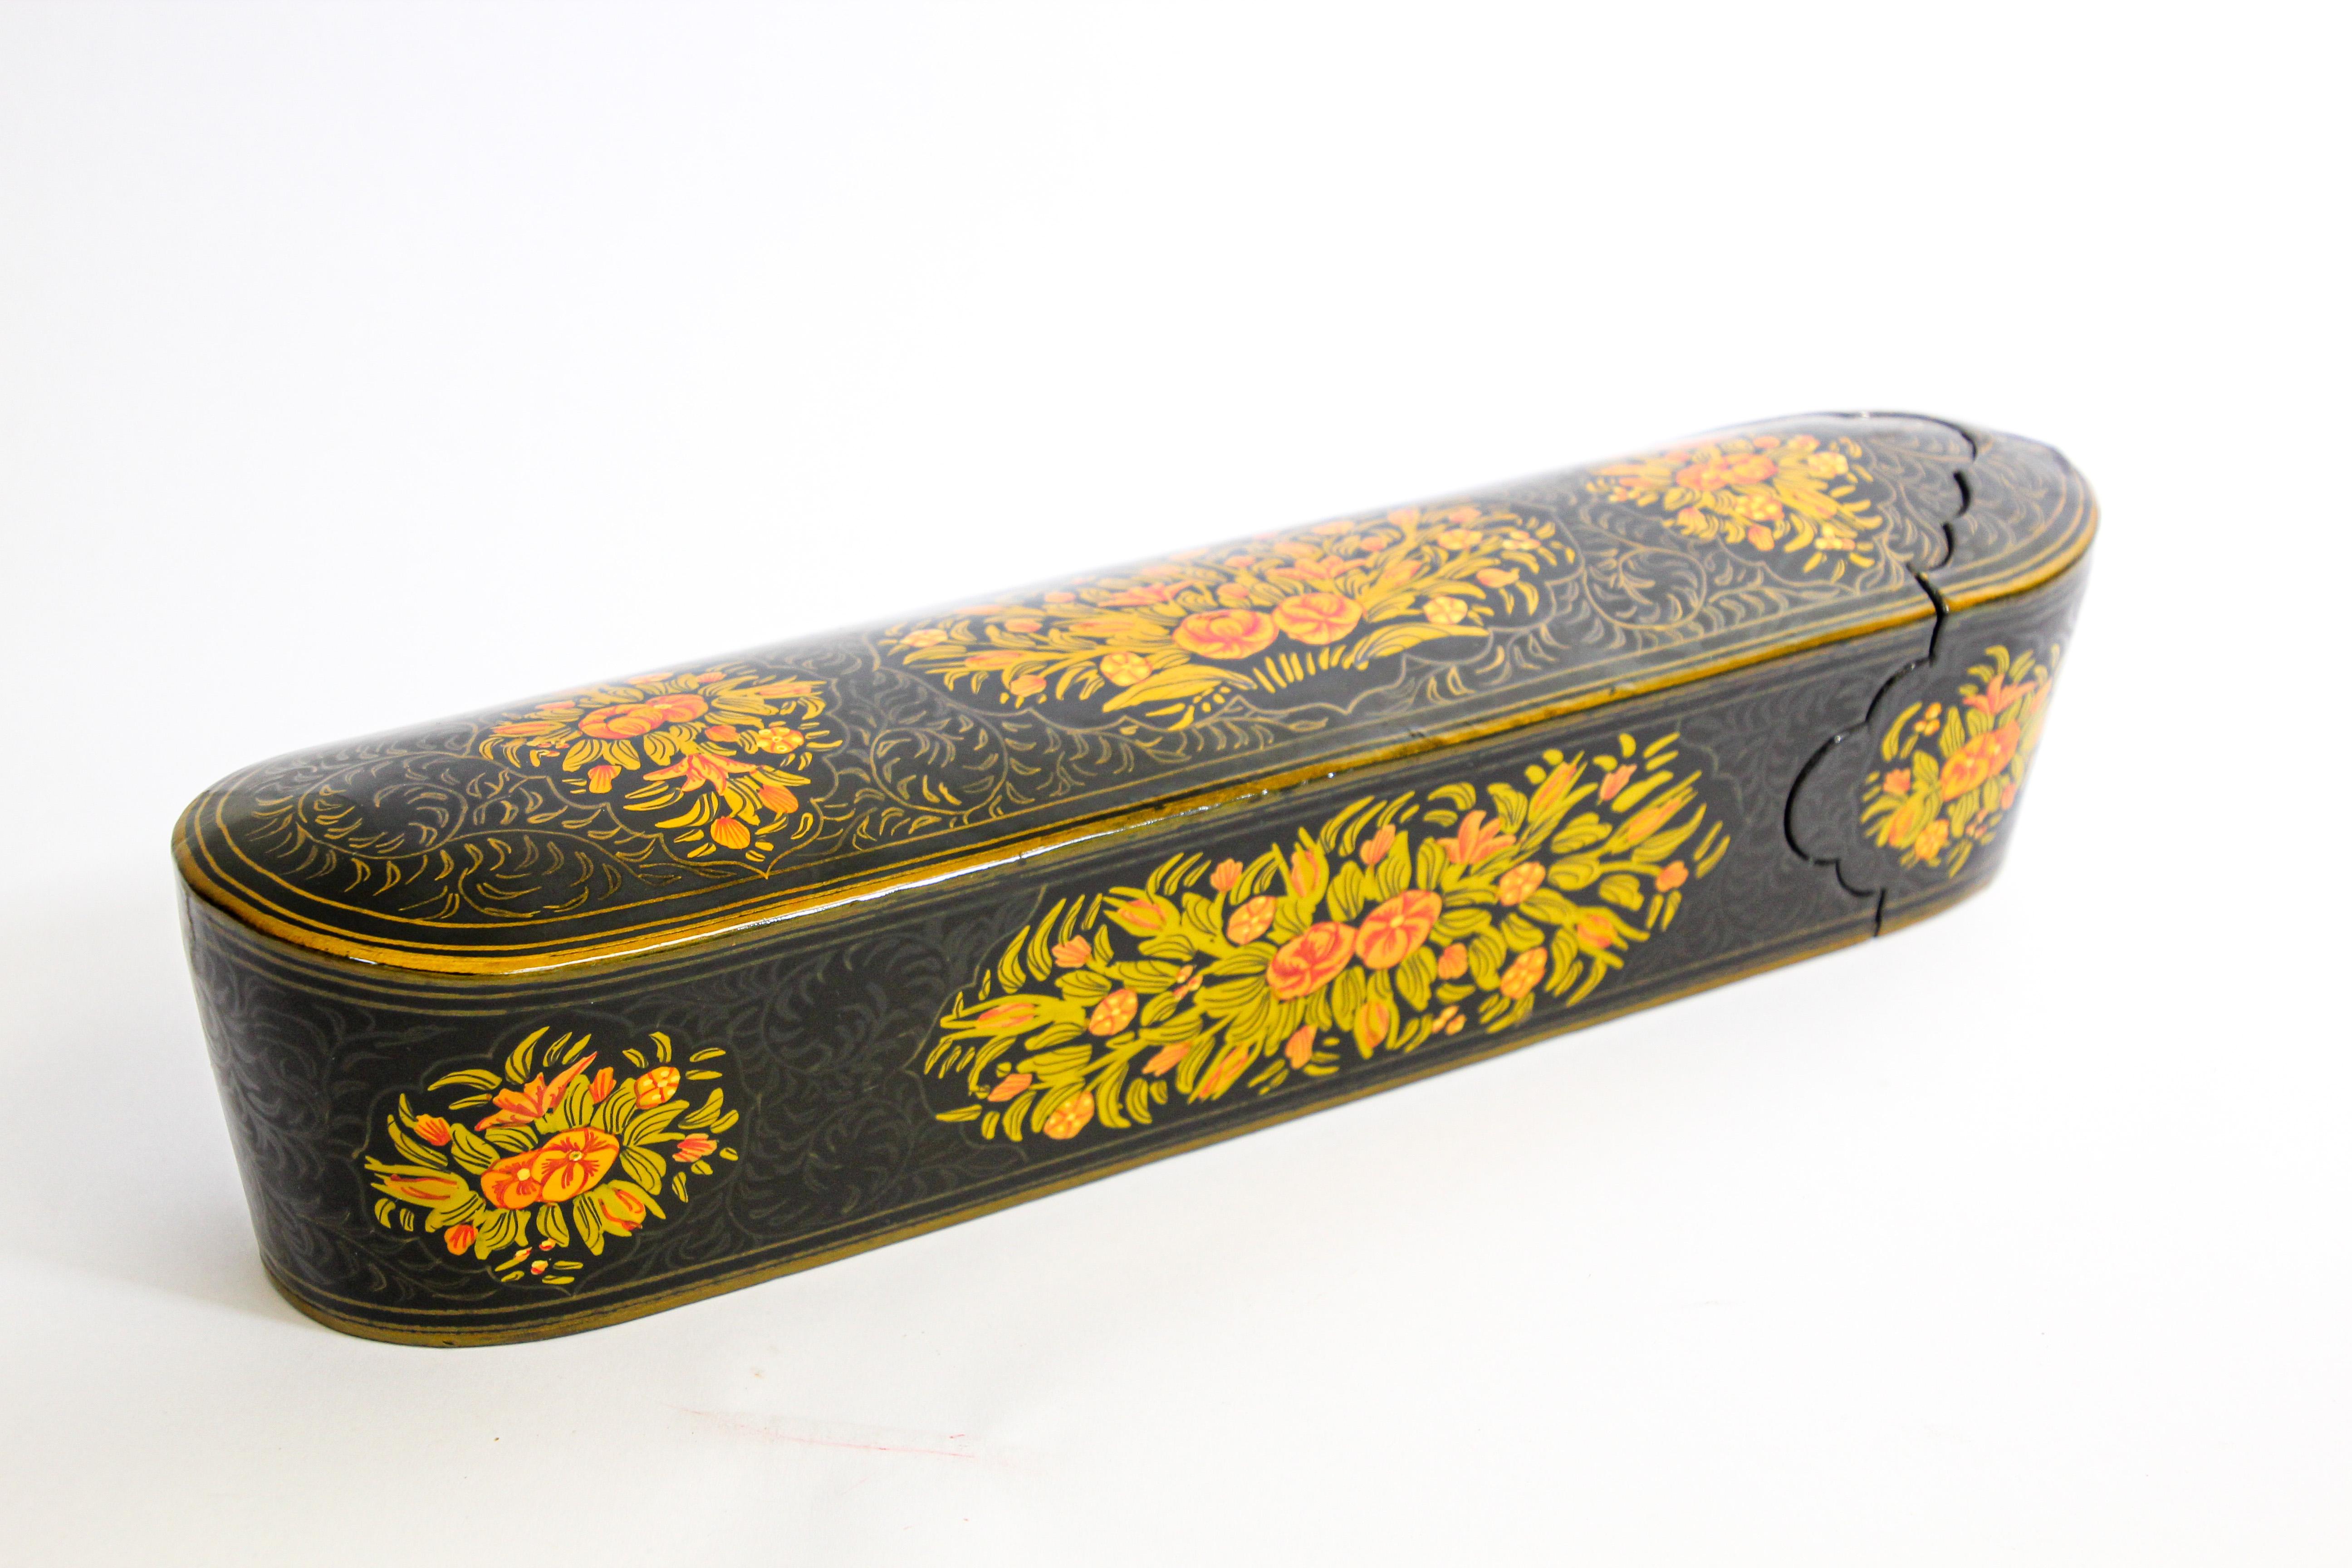 Hand-Painted Indo Persian Lacquer Pen Box Hand Painted with Floral Design